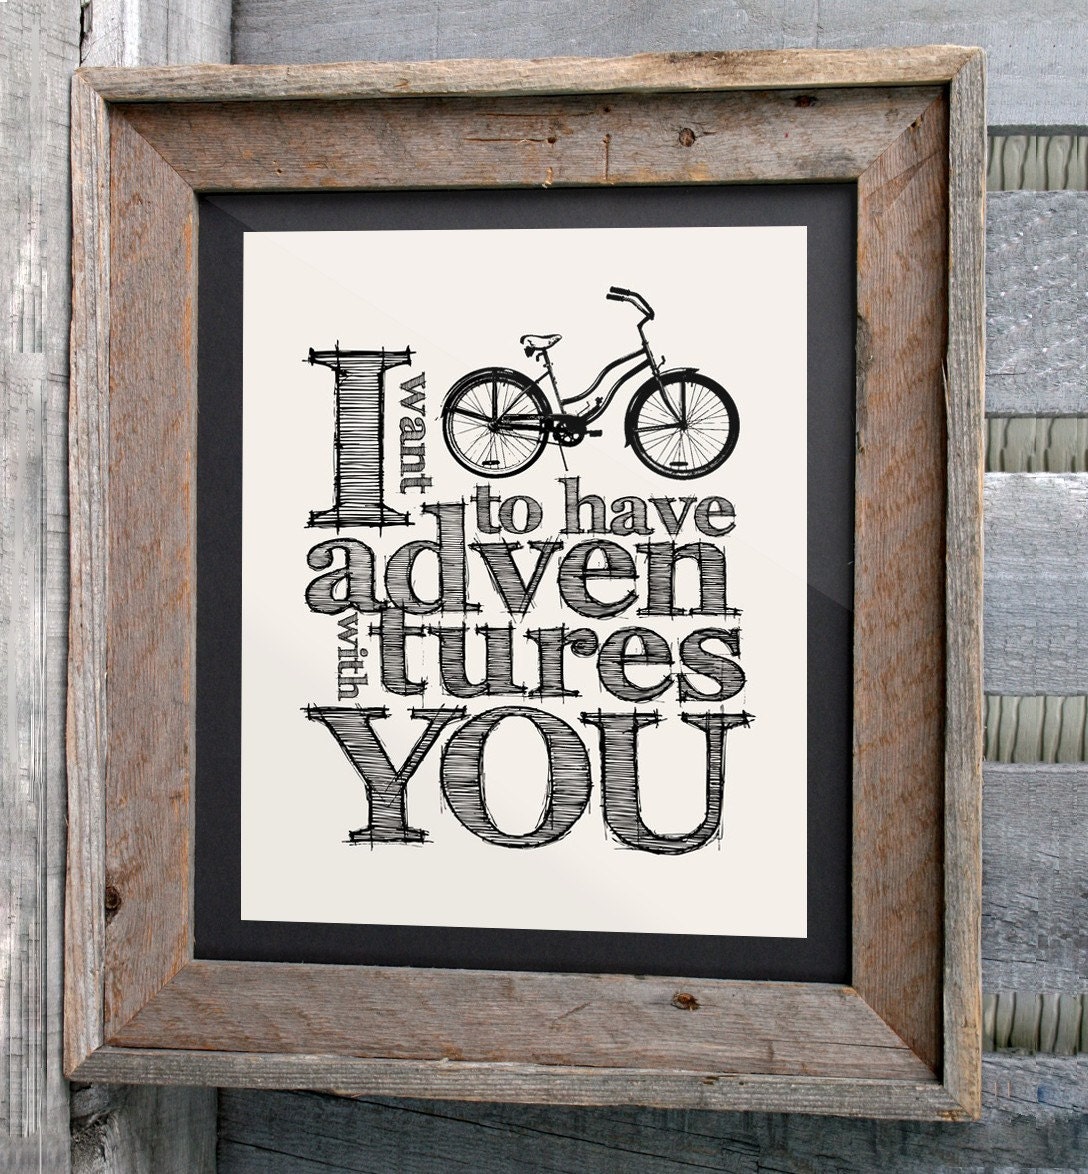 Bicycle Art Poster - 16x20" - "I want to have adventures with you" - Typographic Print